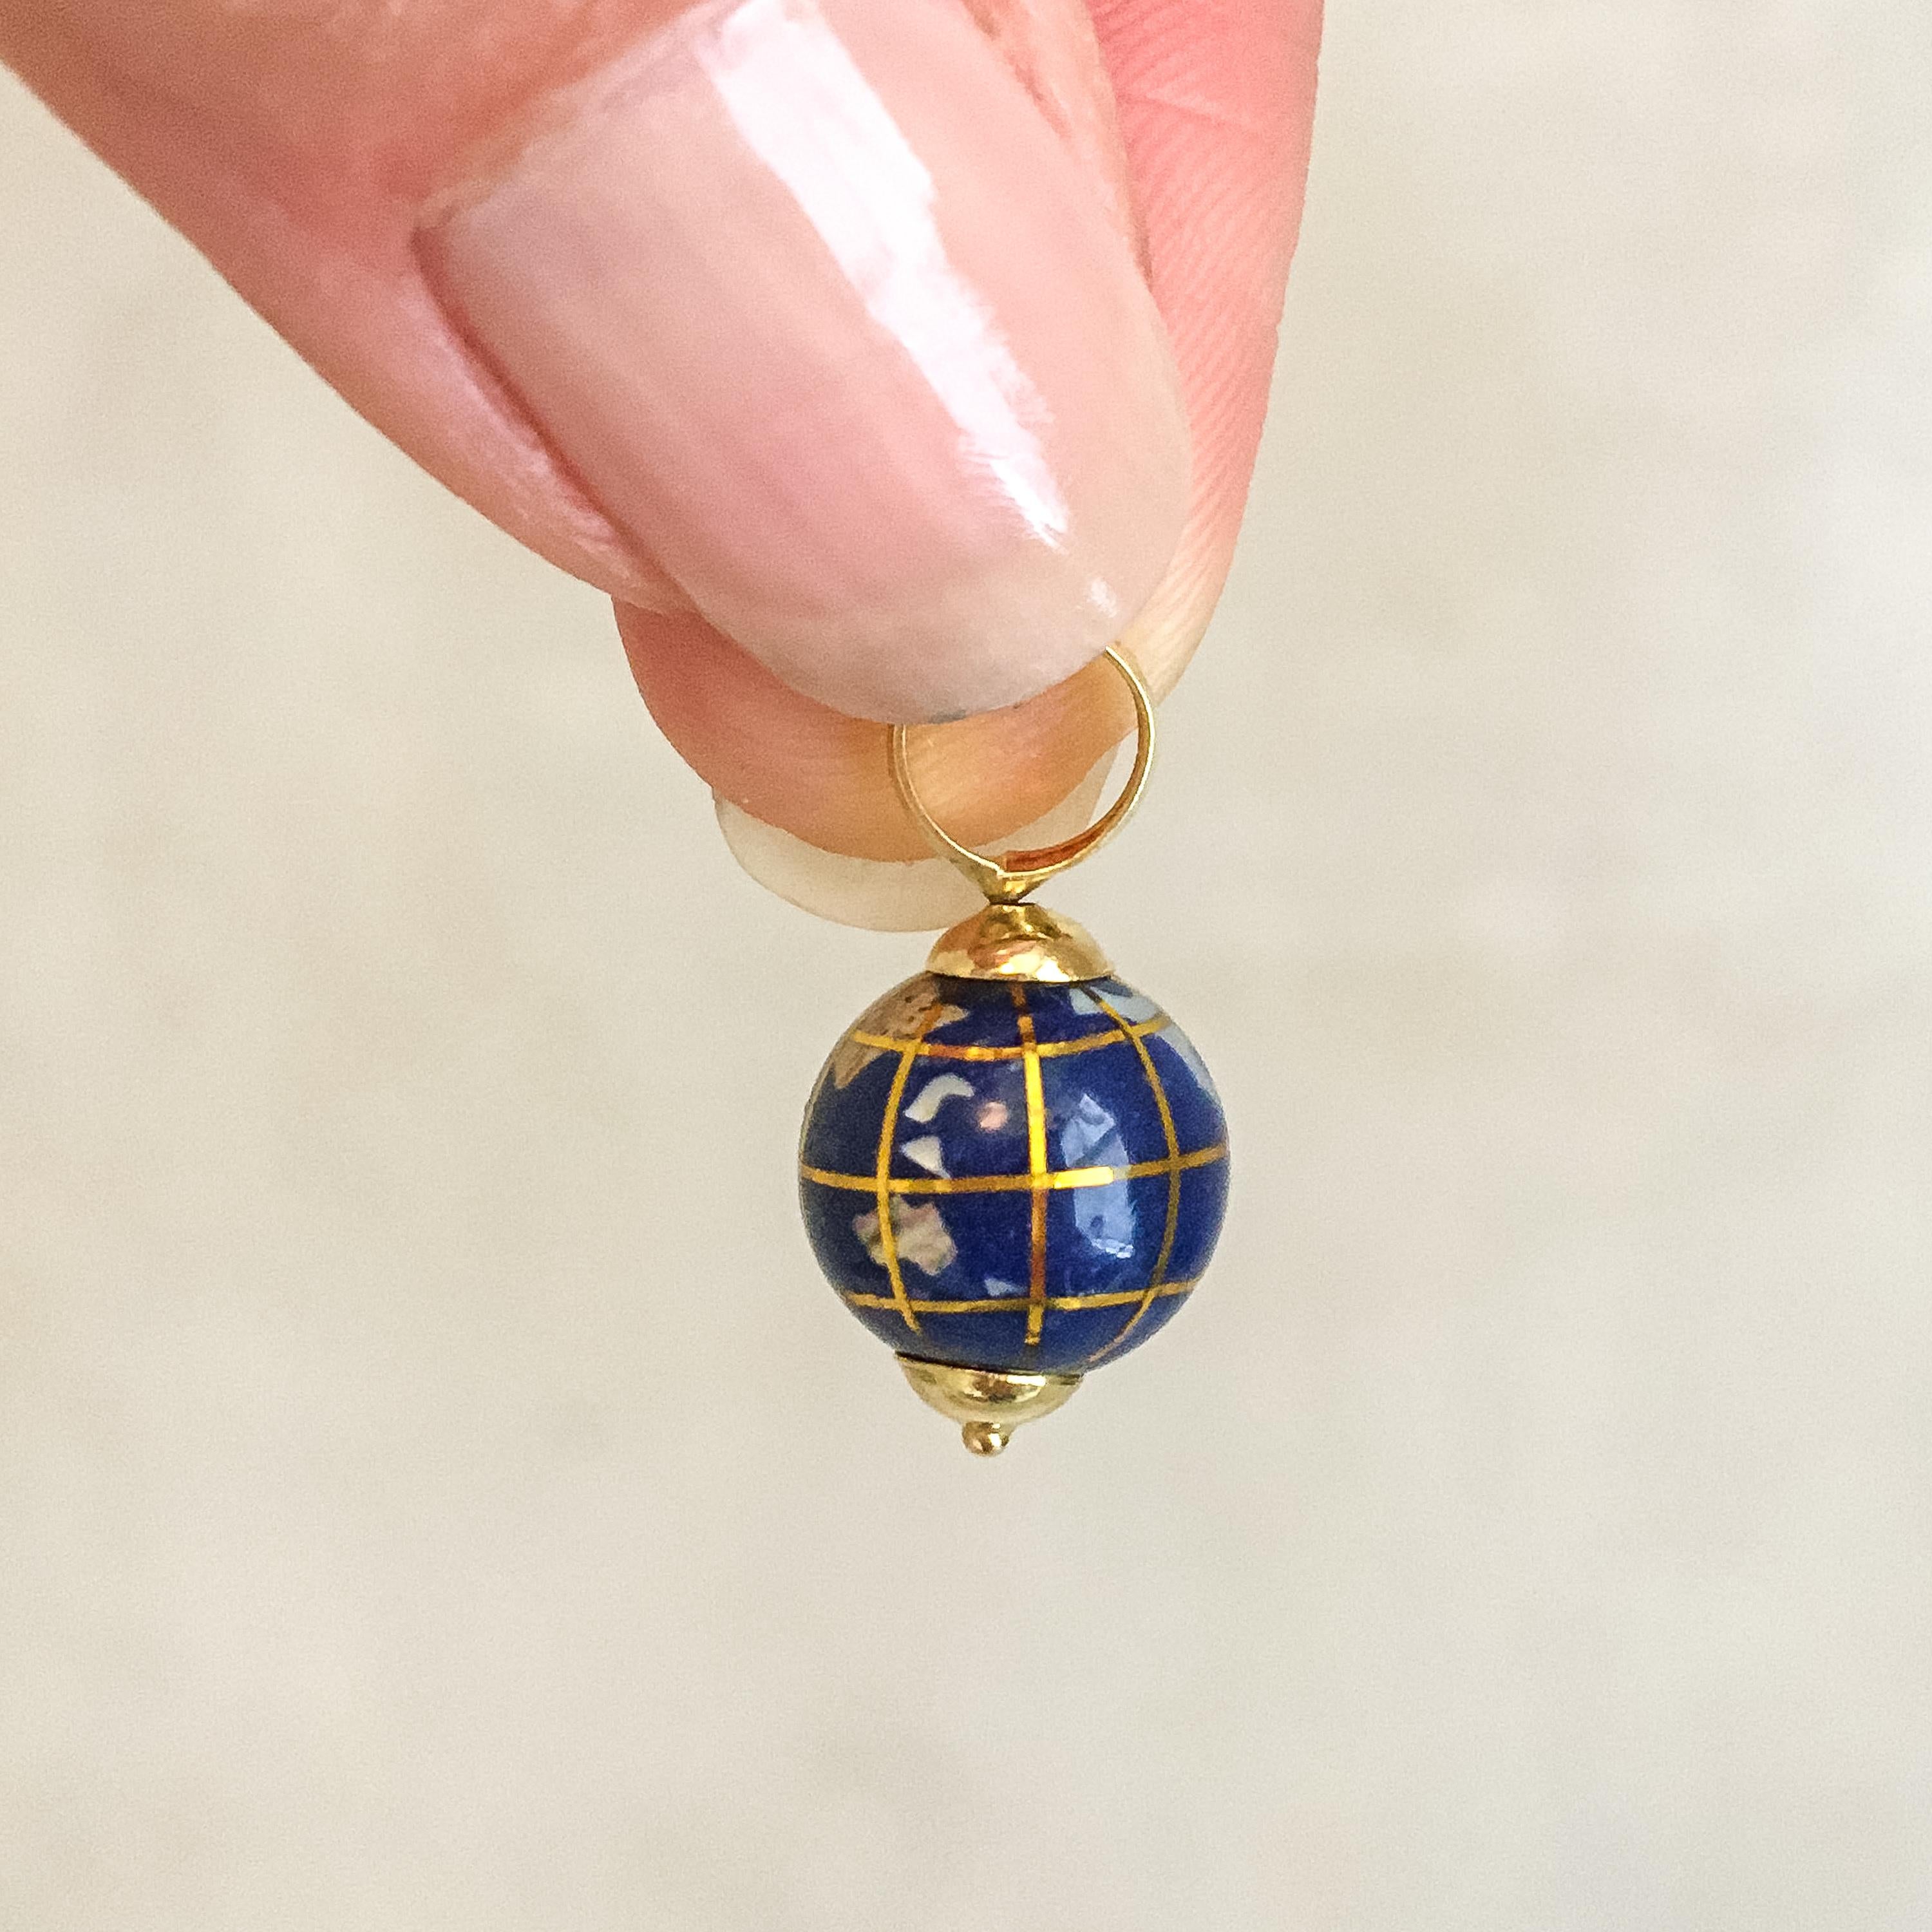 An 18 karat yellow gold pendant in the shape of a globe, made of porcelain containing several continents and islands. These are inlaid with mother-of-pearl and semi-precious stones, including Aventurine, Jasper and Peridot. The porcelain is finished